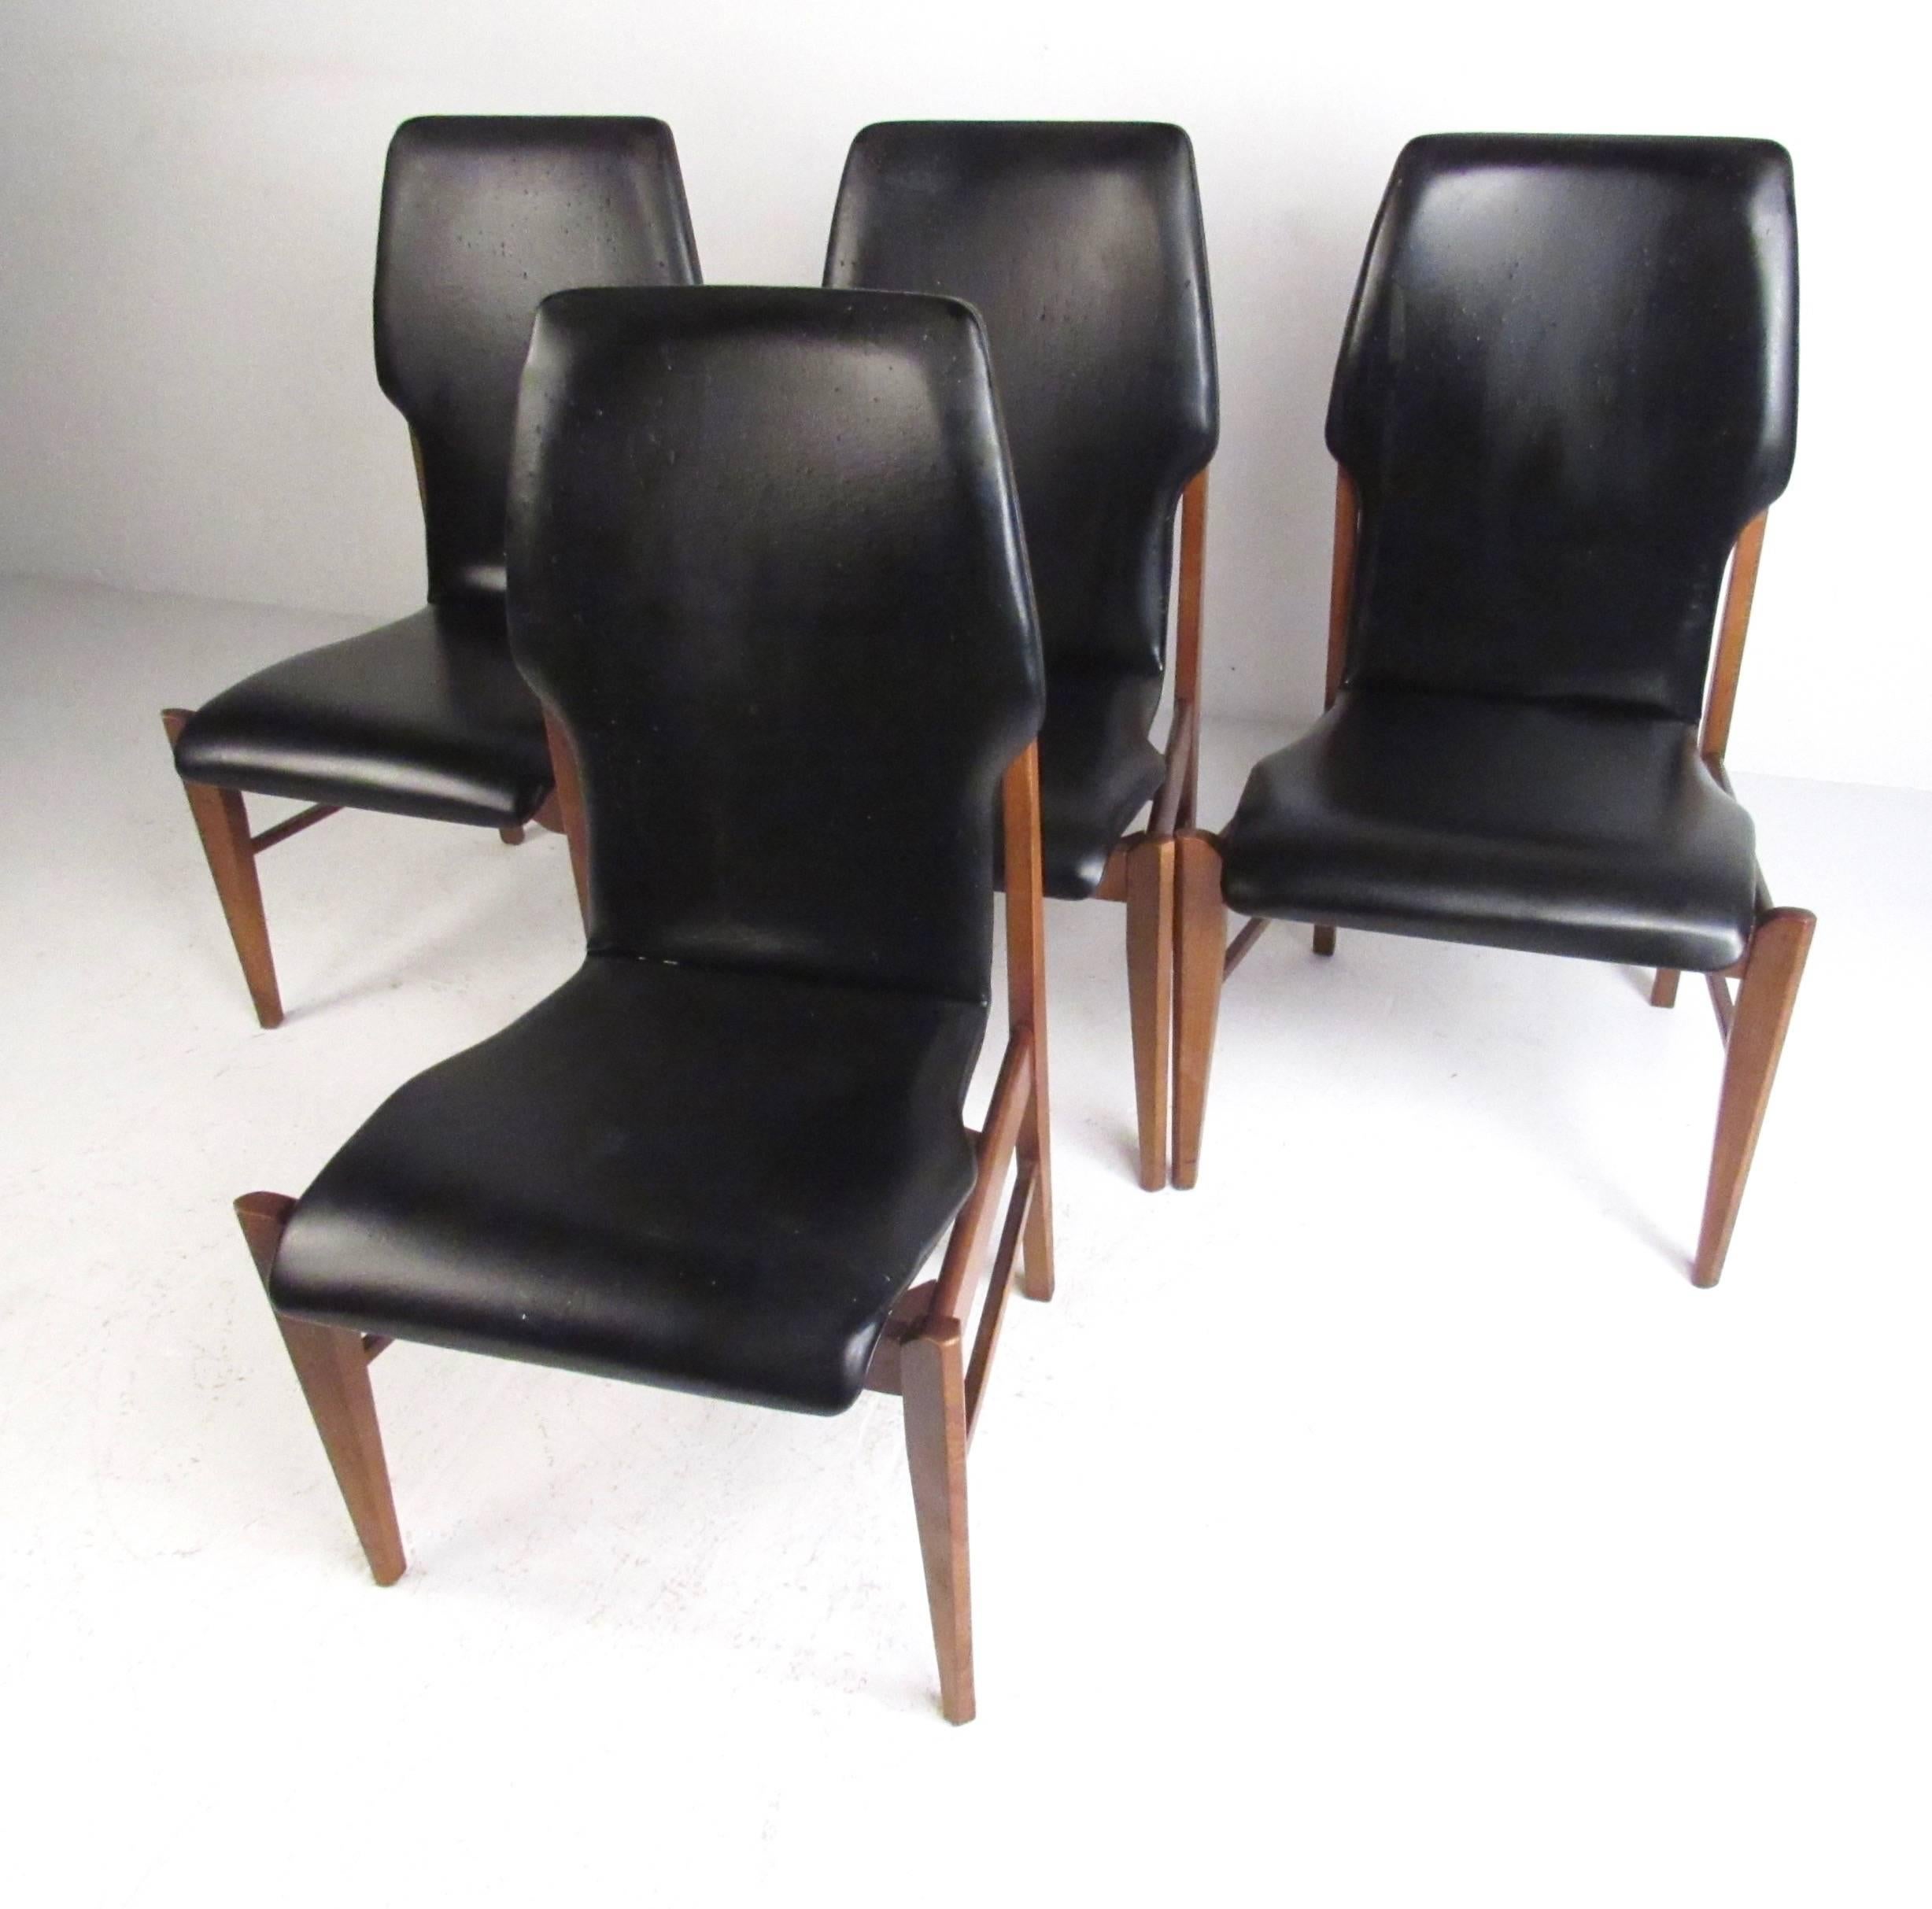 This stylish set of four matching dining chairs offer a shapely vinyl covered seat, with comfortable high backs. Hardwood walnut frames with tapered legs and clean modern lines add to the Mid-Century appeal of these vintage dining chairs. Please